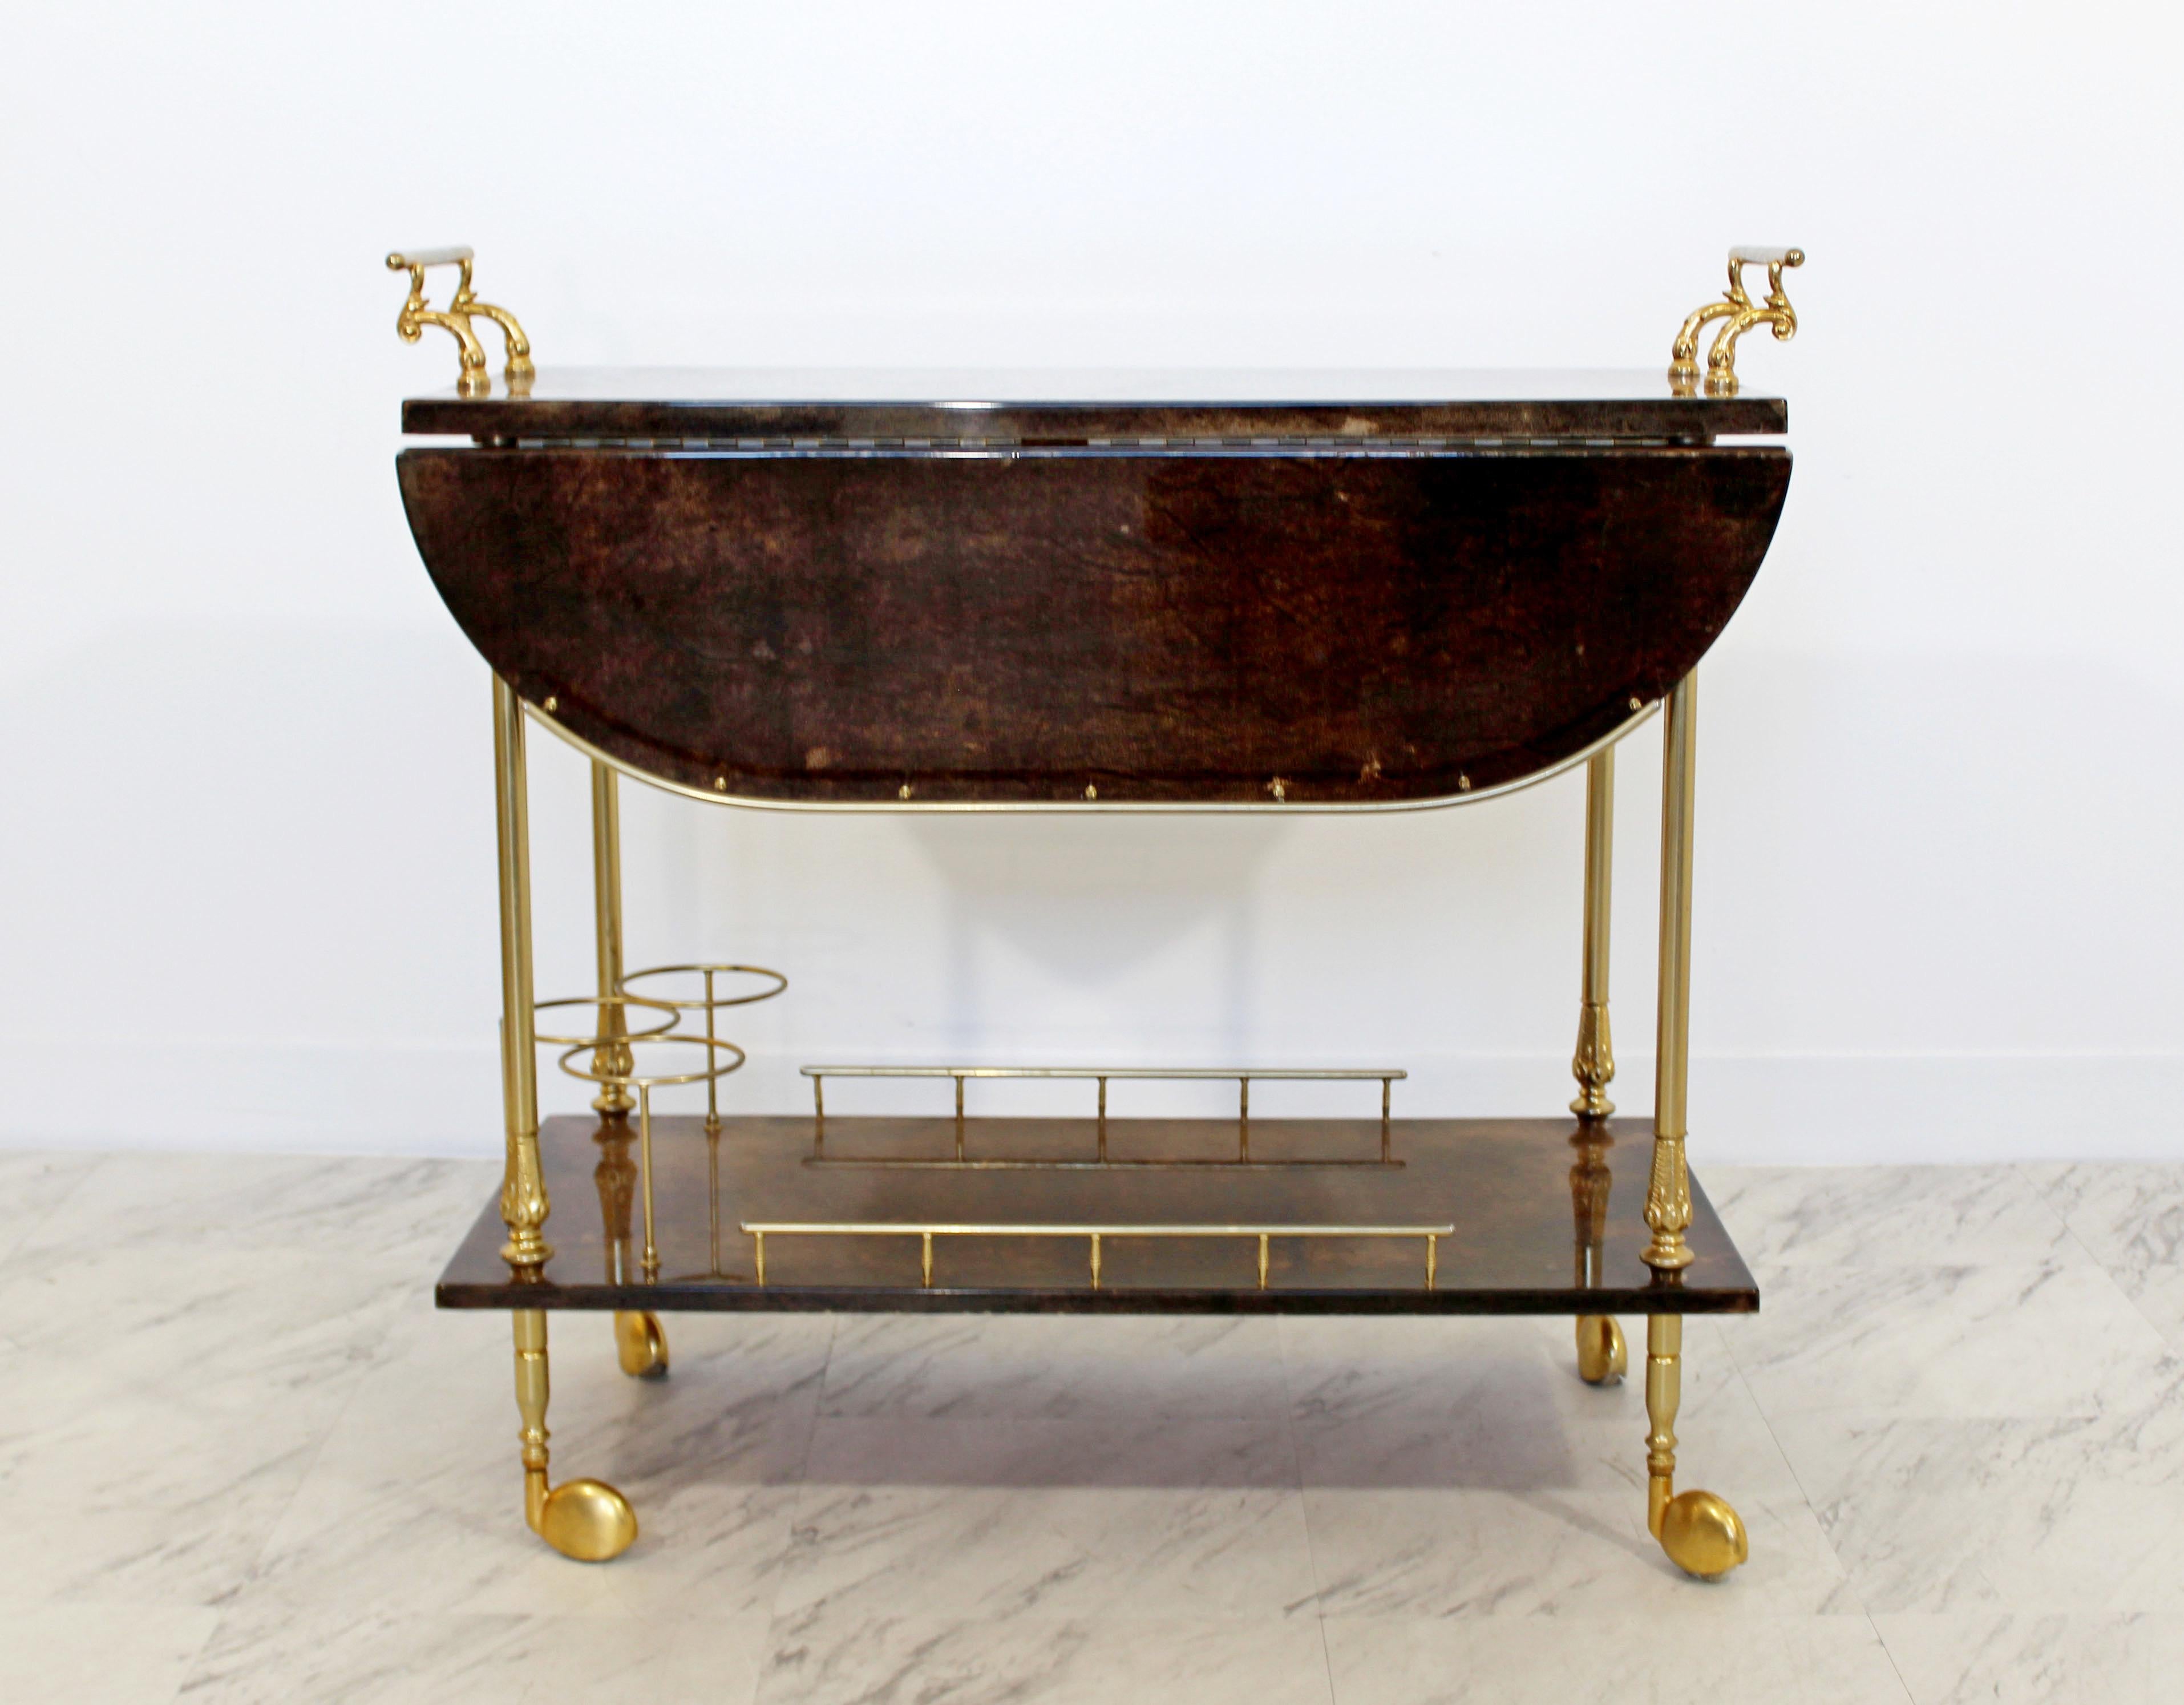 For your consideration is an absolutely stunning, brown goatskin lacquered bar cart, with brass accents, circa the 1950s. In very good condition. The dimensions with the leaves down are 31